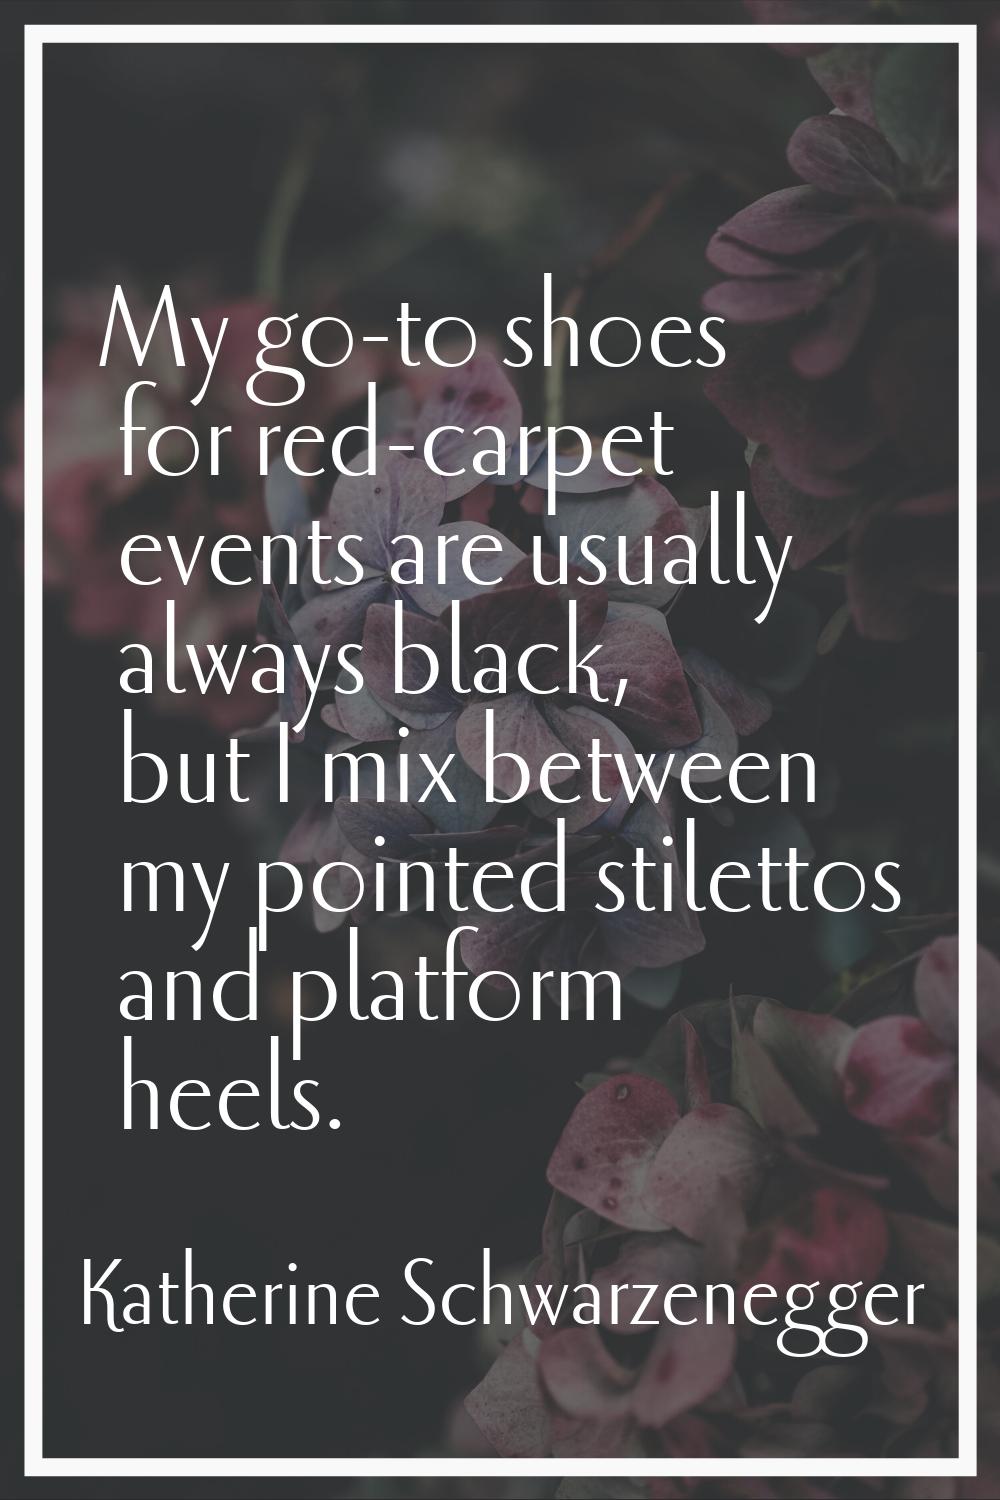 My go-to shoes for red-carpet events are usually always black, but I mix between my pointed stilett